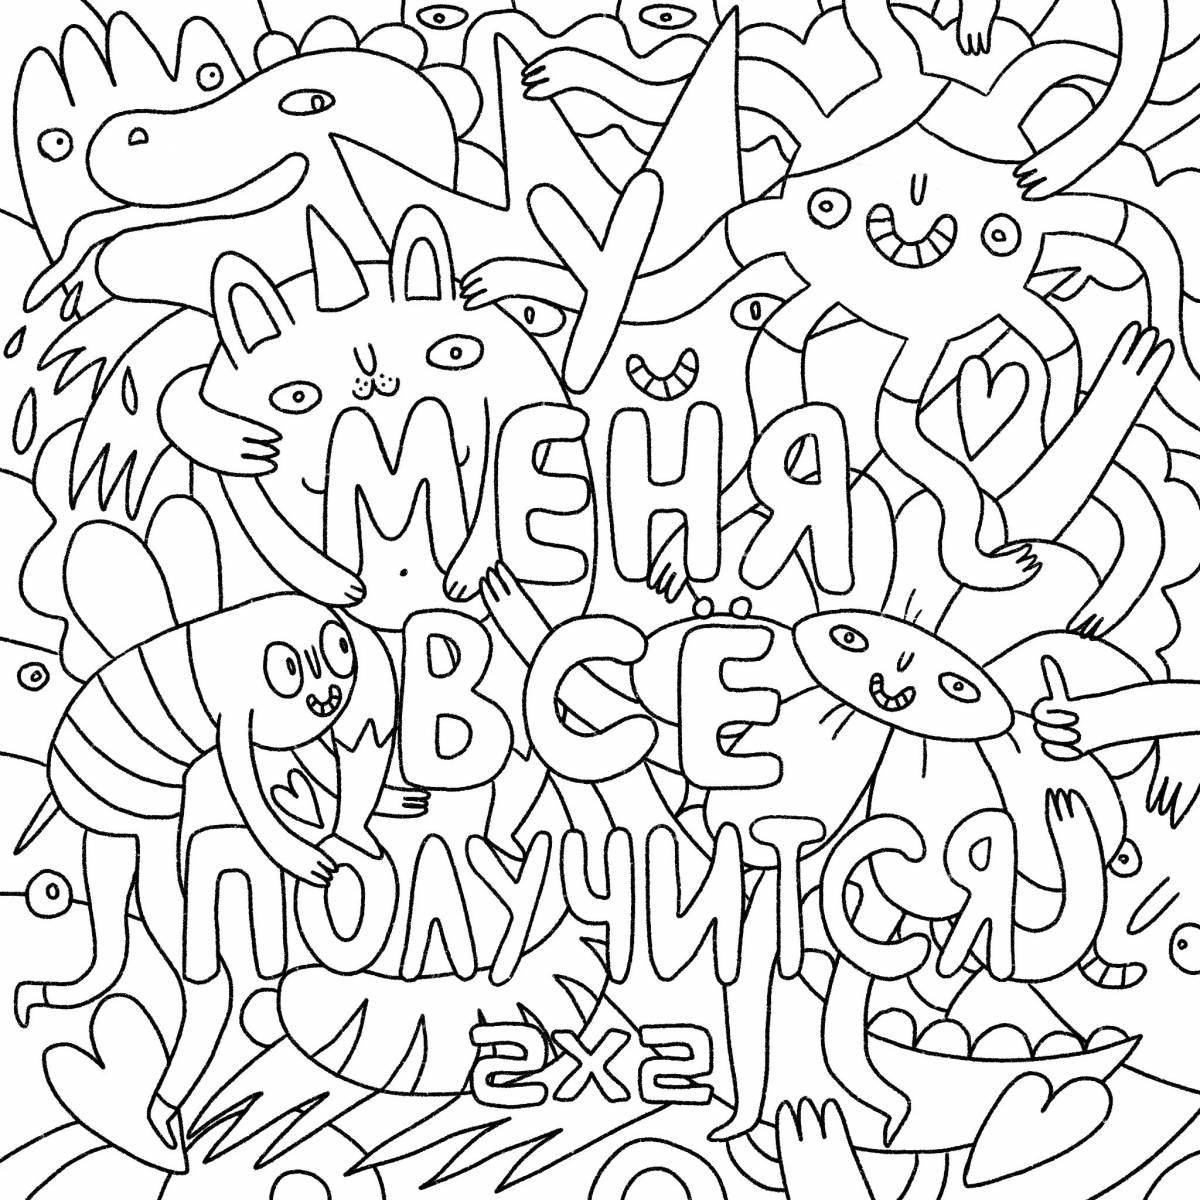 Hypnotizing letter-eater coloring page